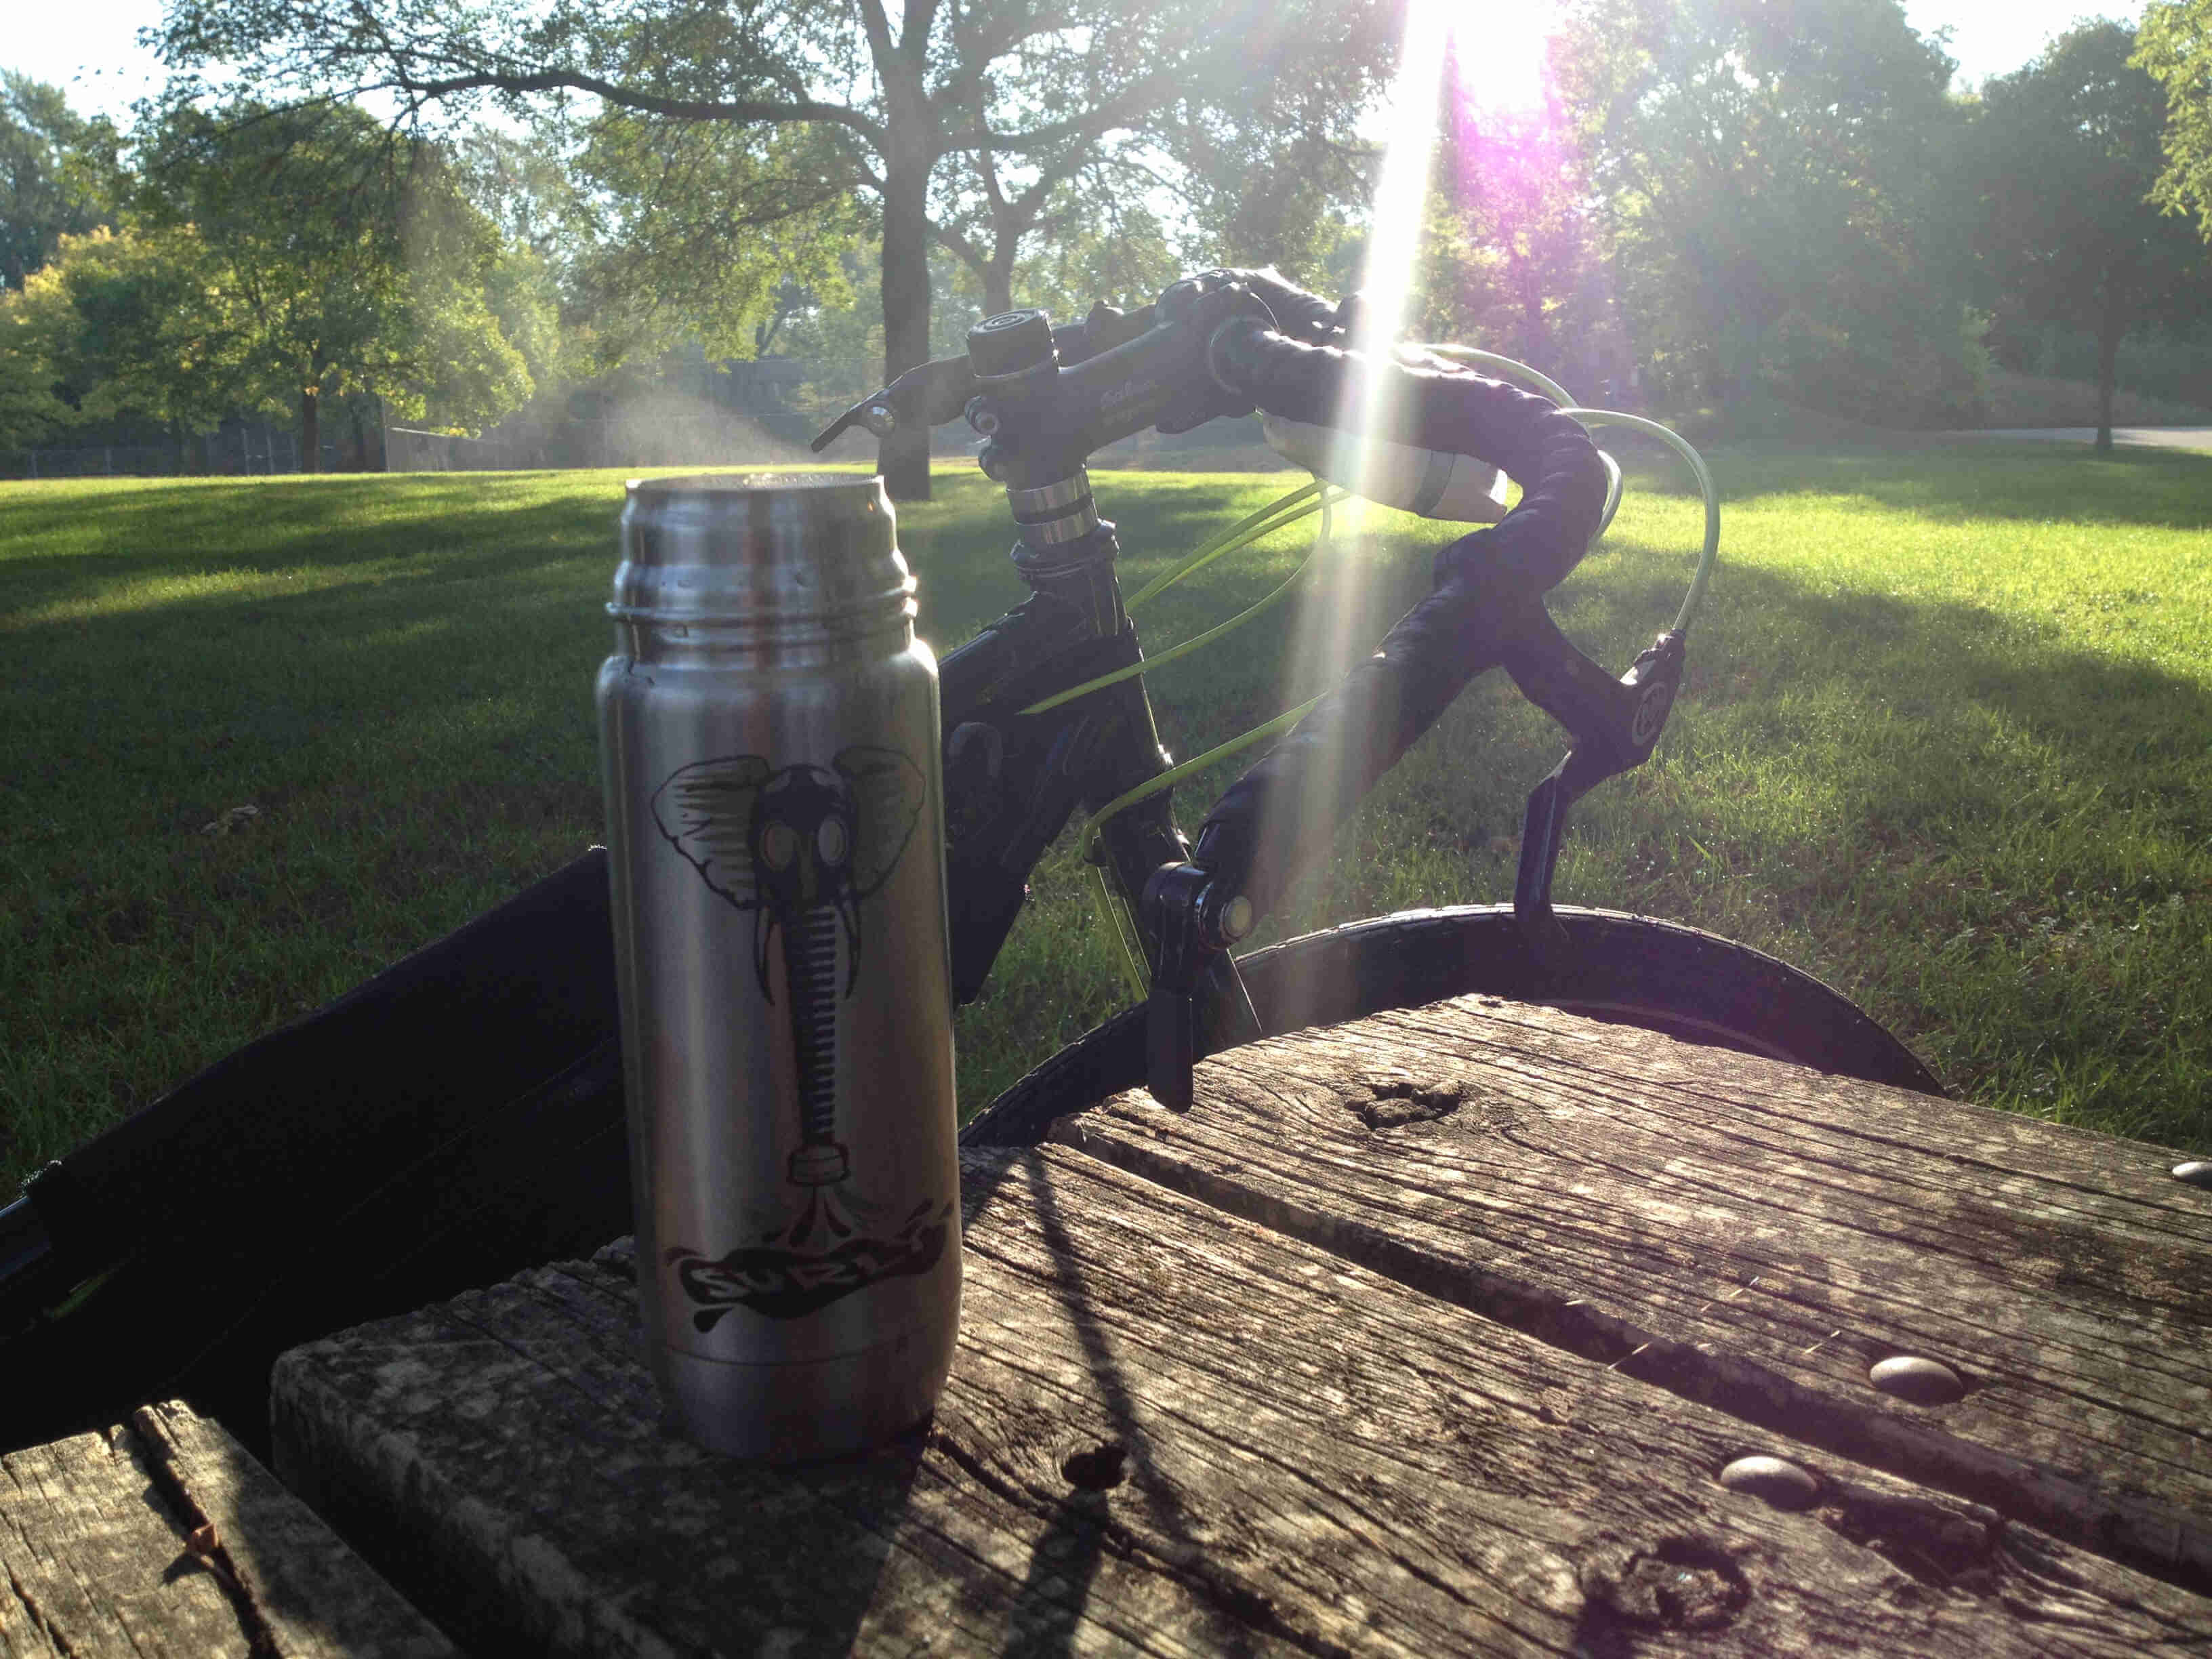 A steel Surly bikes water bottle with an elephant graphic on it, on a wood table with a bike behind it, in a park field